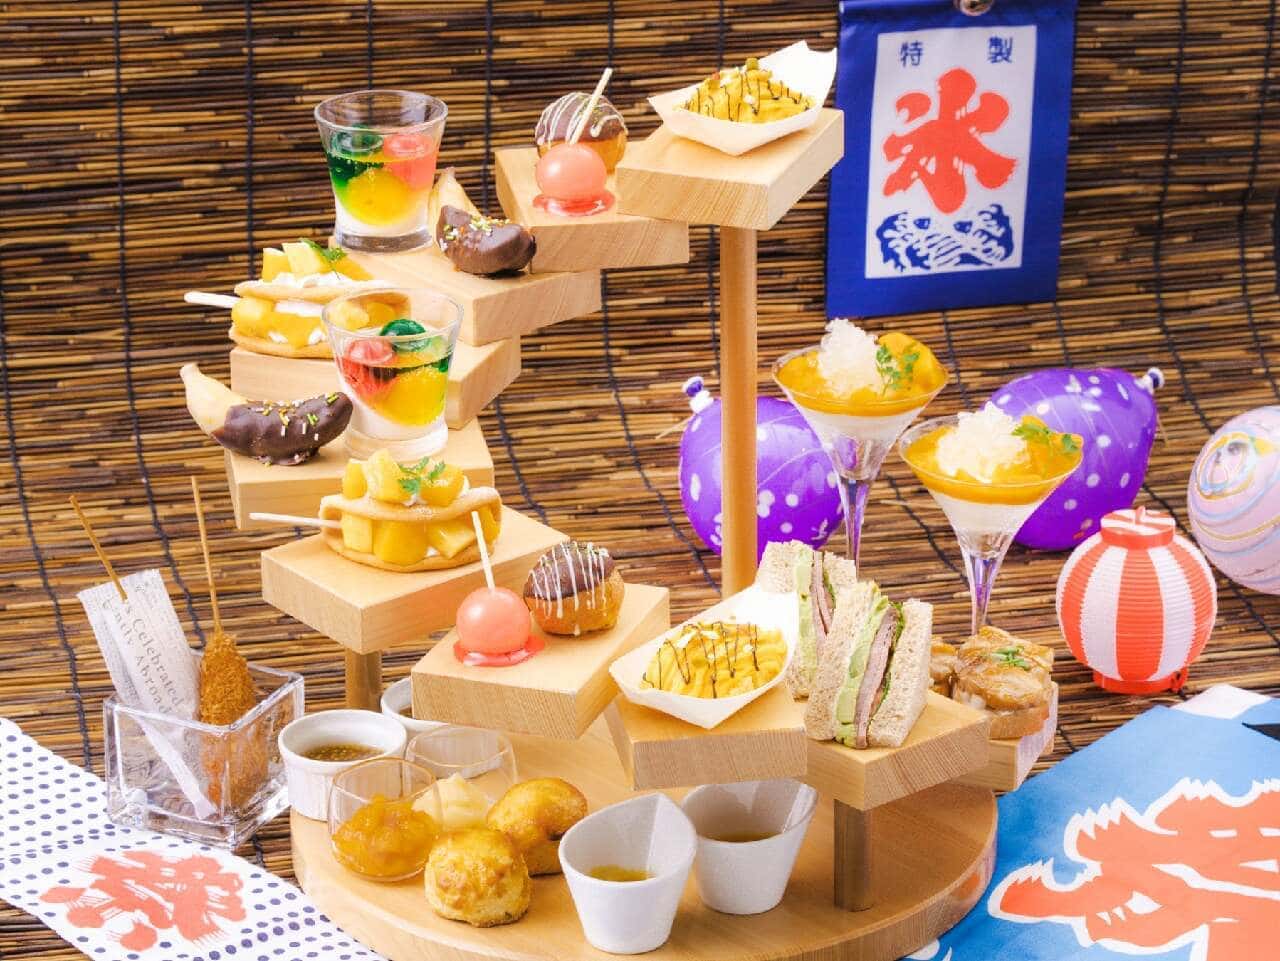 Cross Hotel Osaka launches "Afternoon Tea summer festival" themed summer festival afternoon tea on June 1.